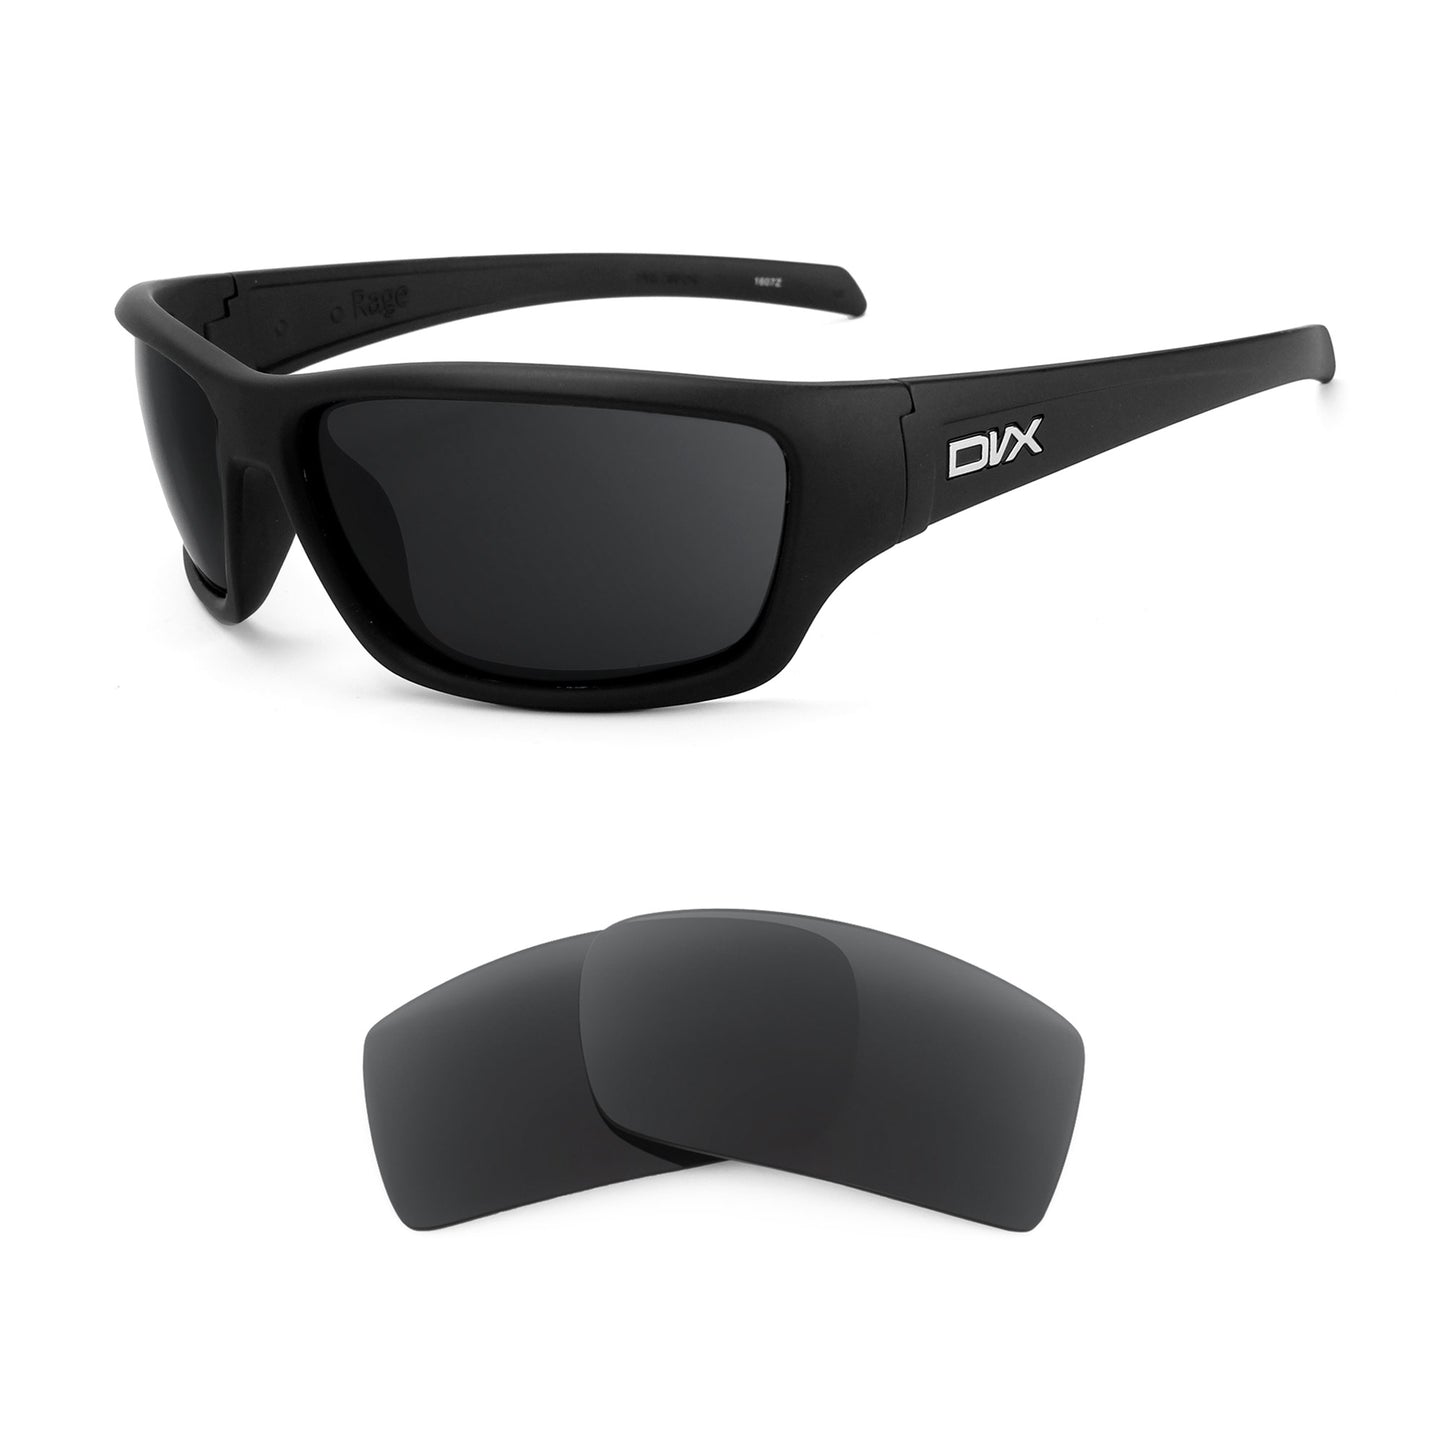 DVX Eyewear Rage sunglasses with replacement lenses